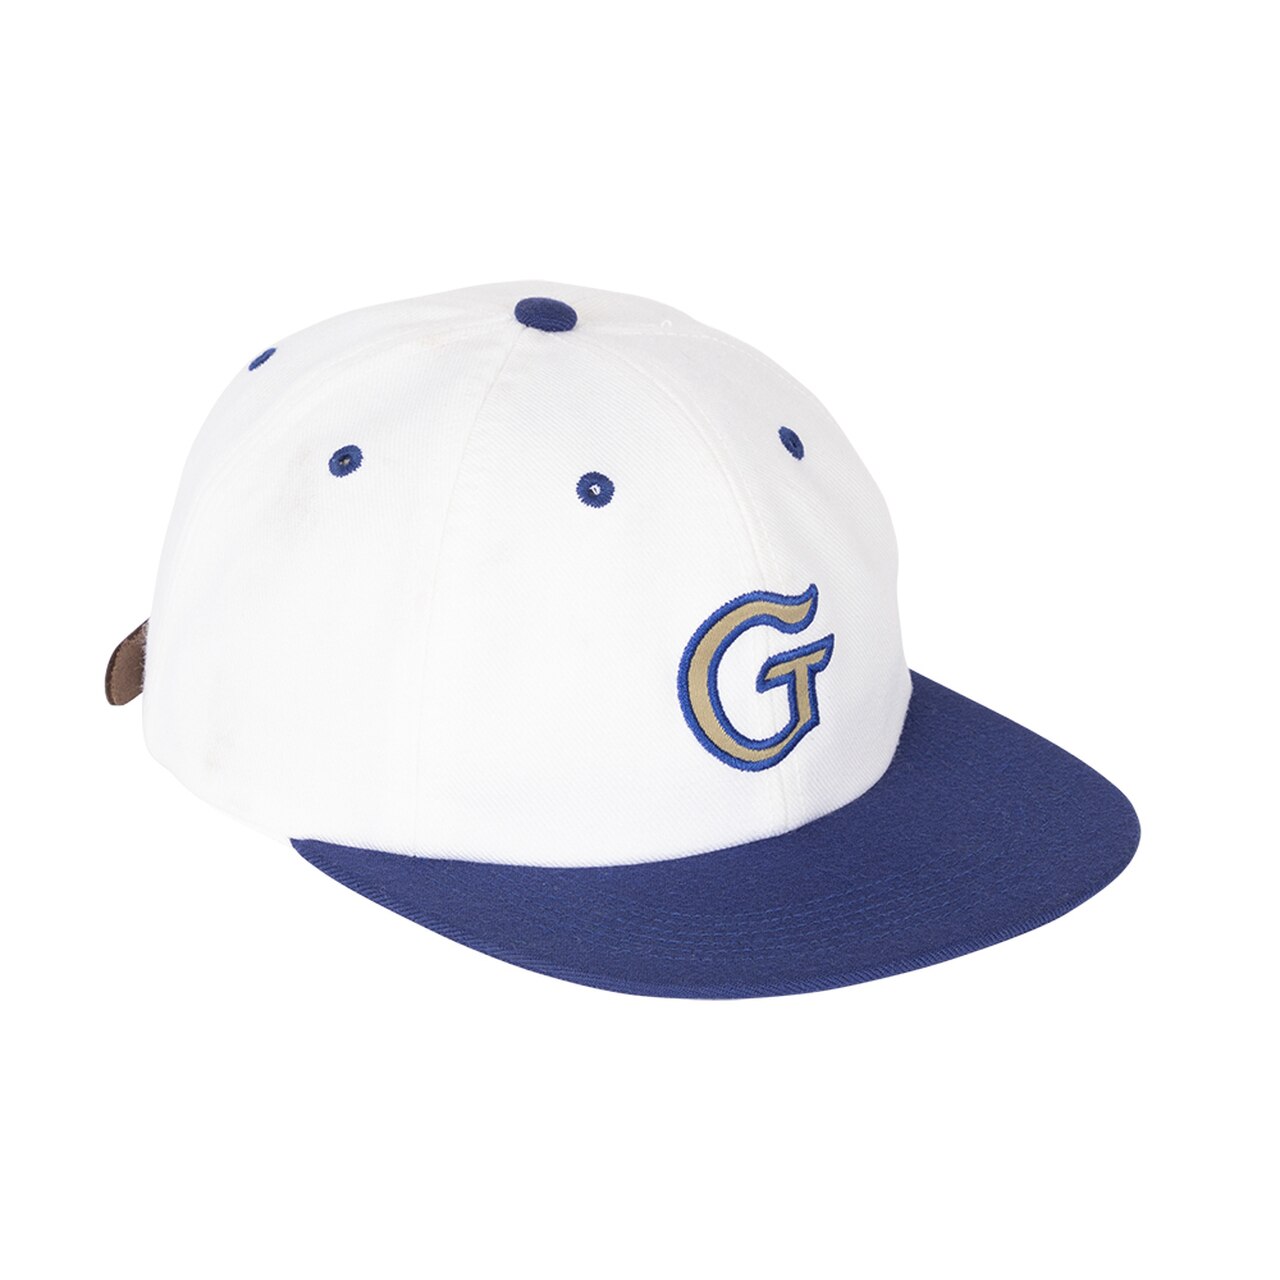 GAYLORD TWO-TONE 6 PANEL HAT BLUE